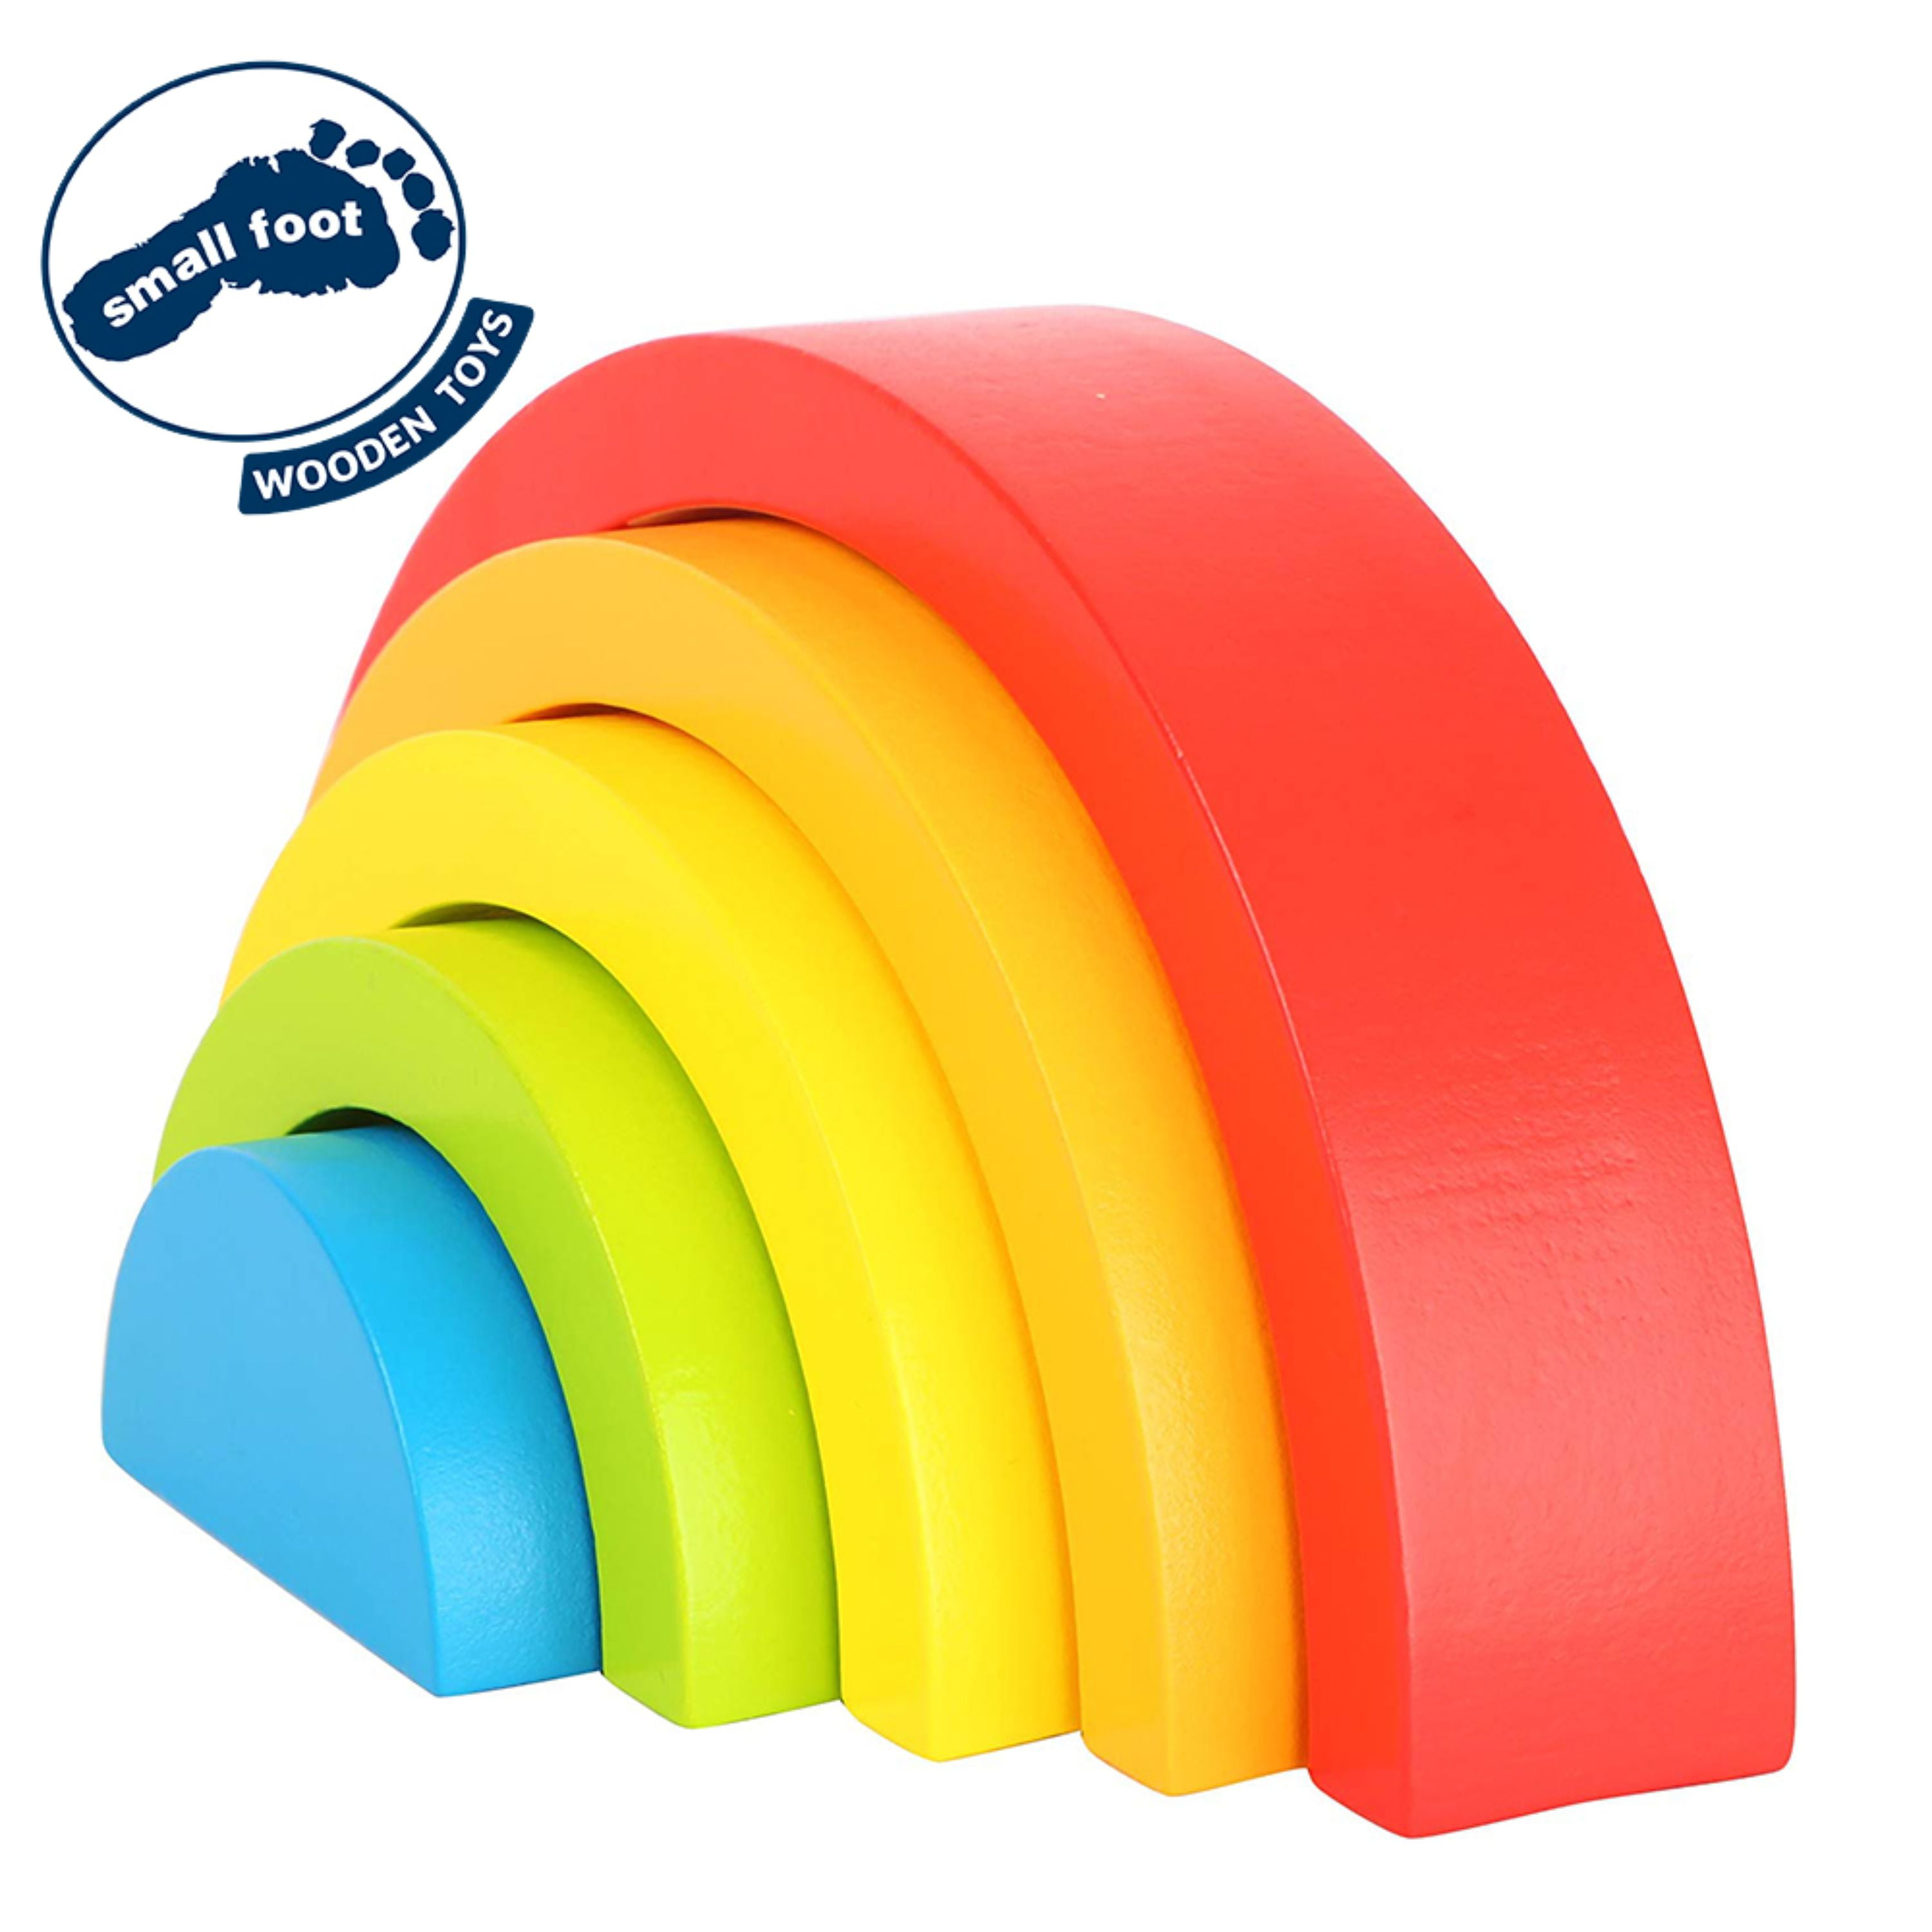 7 Color Wooden Stacking Rainbow Shape Brick Kids Childrens Educational NZ 